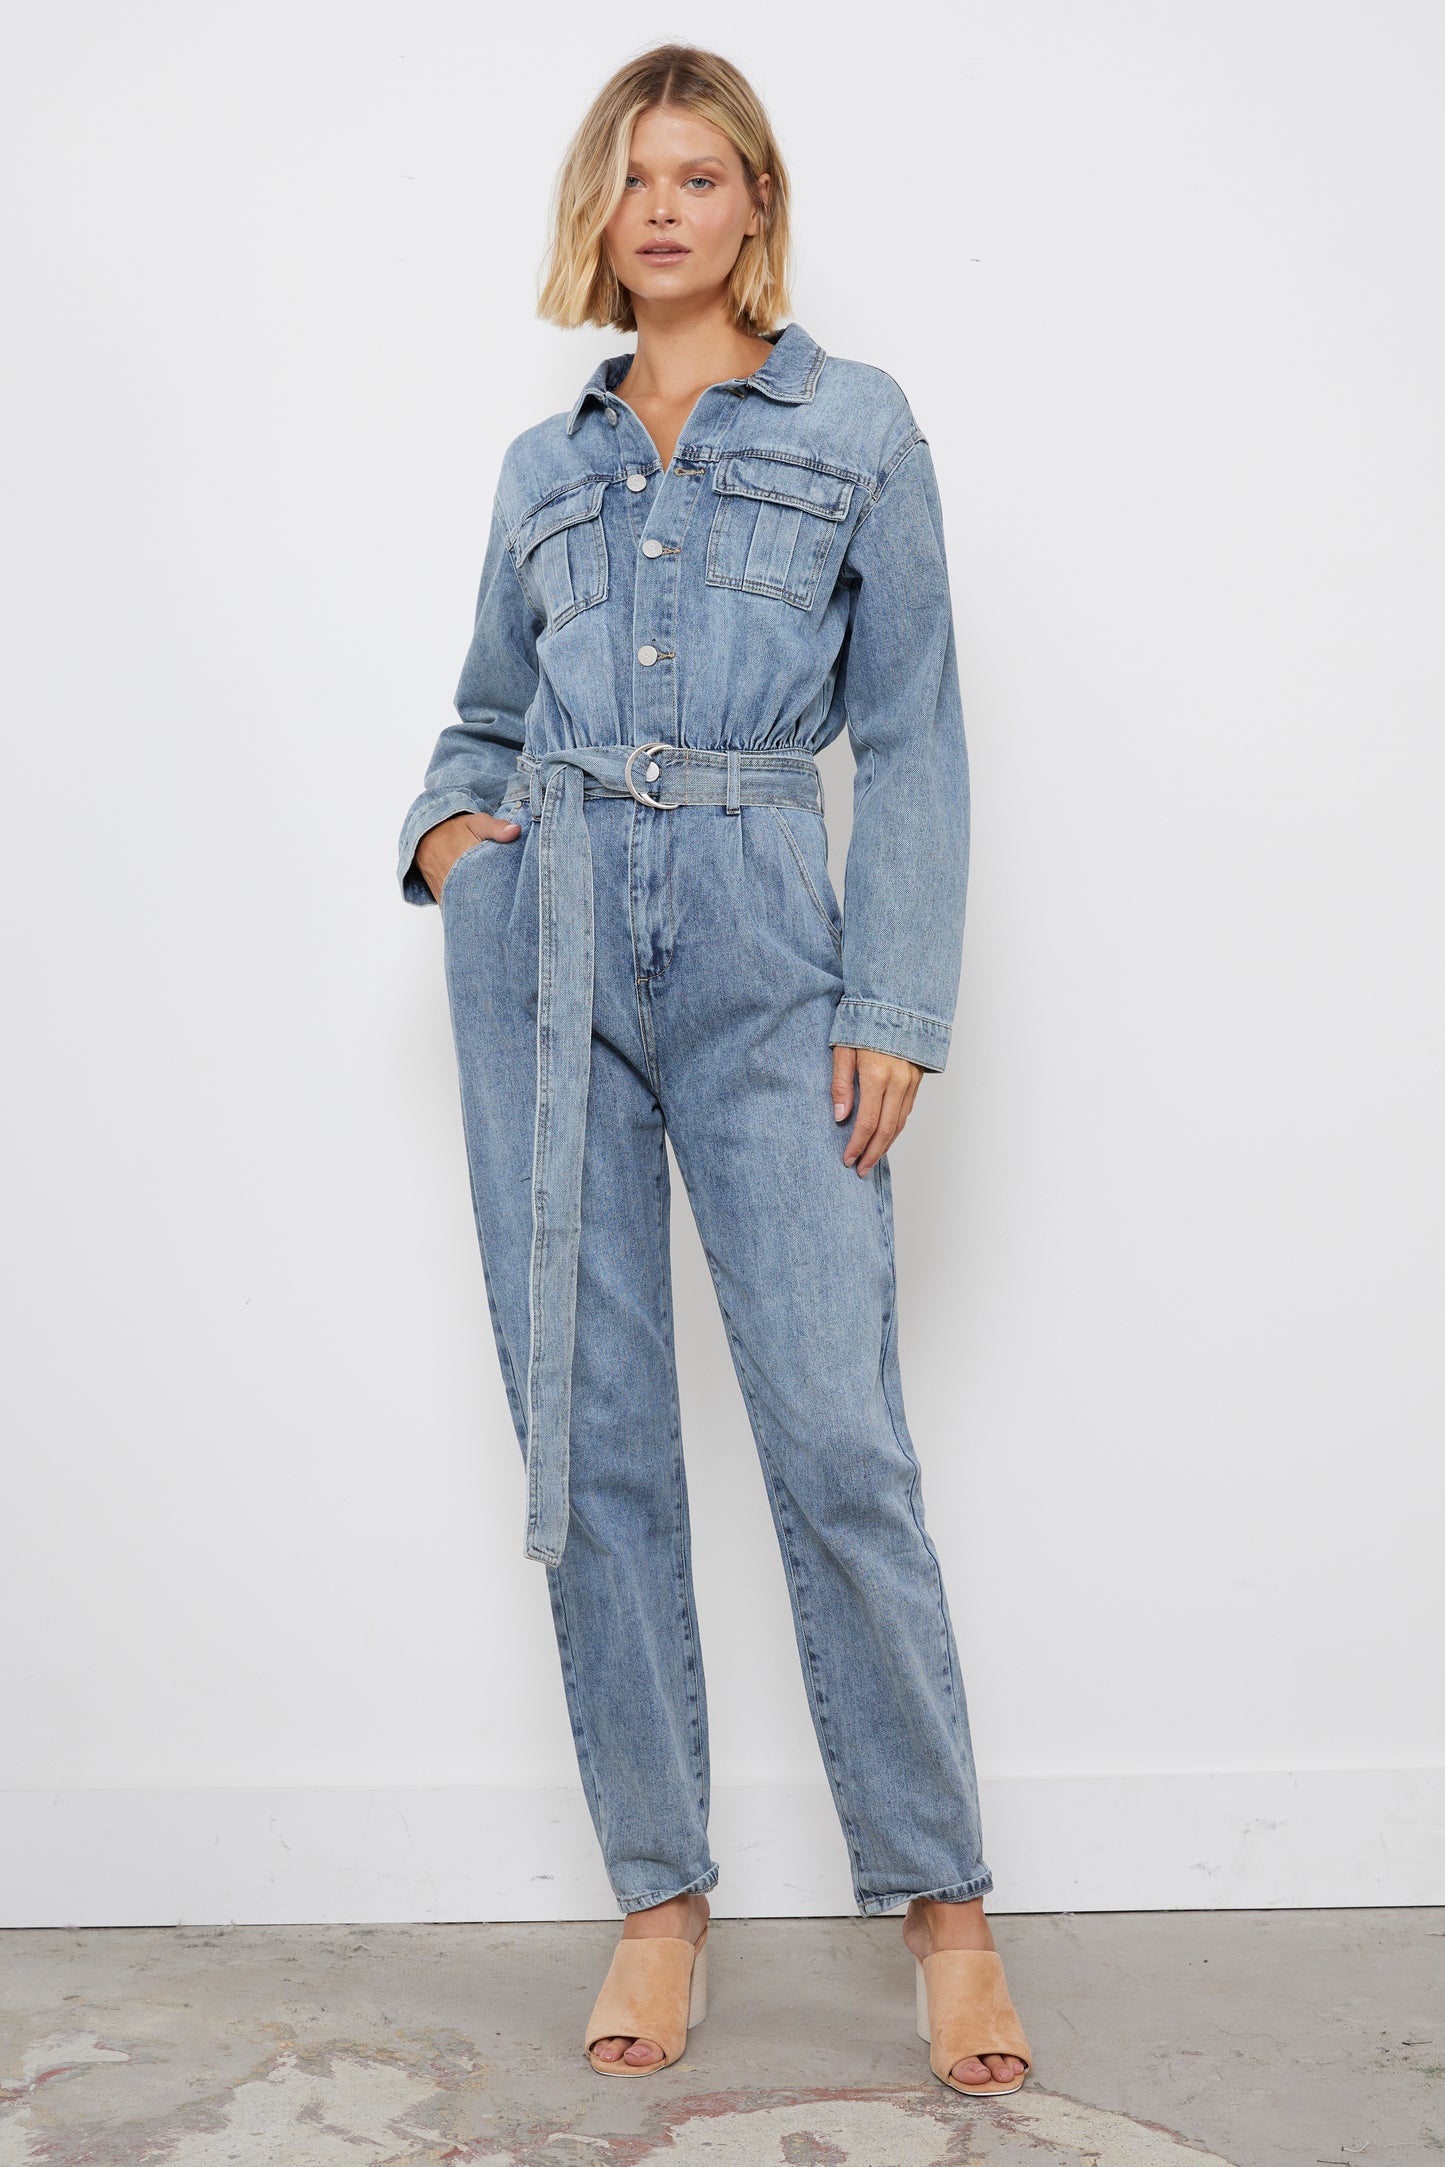 I Dream Of Jeanie Jumpsuit